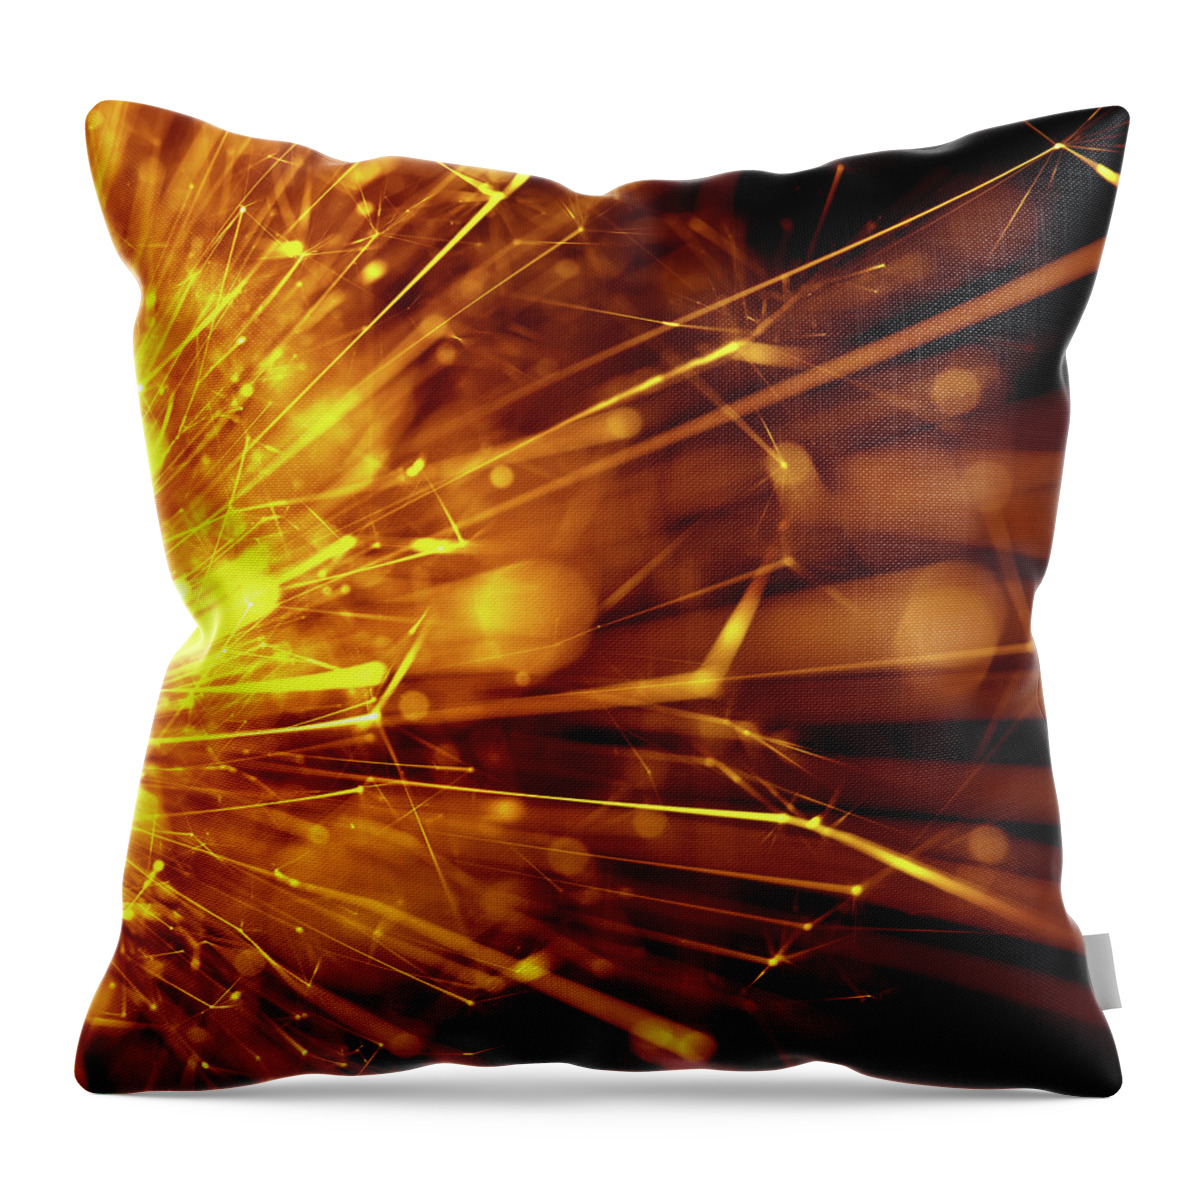 Firework Display Throw Pillow featuring the photograph Fire Sparkler #1 by Nikada